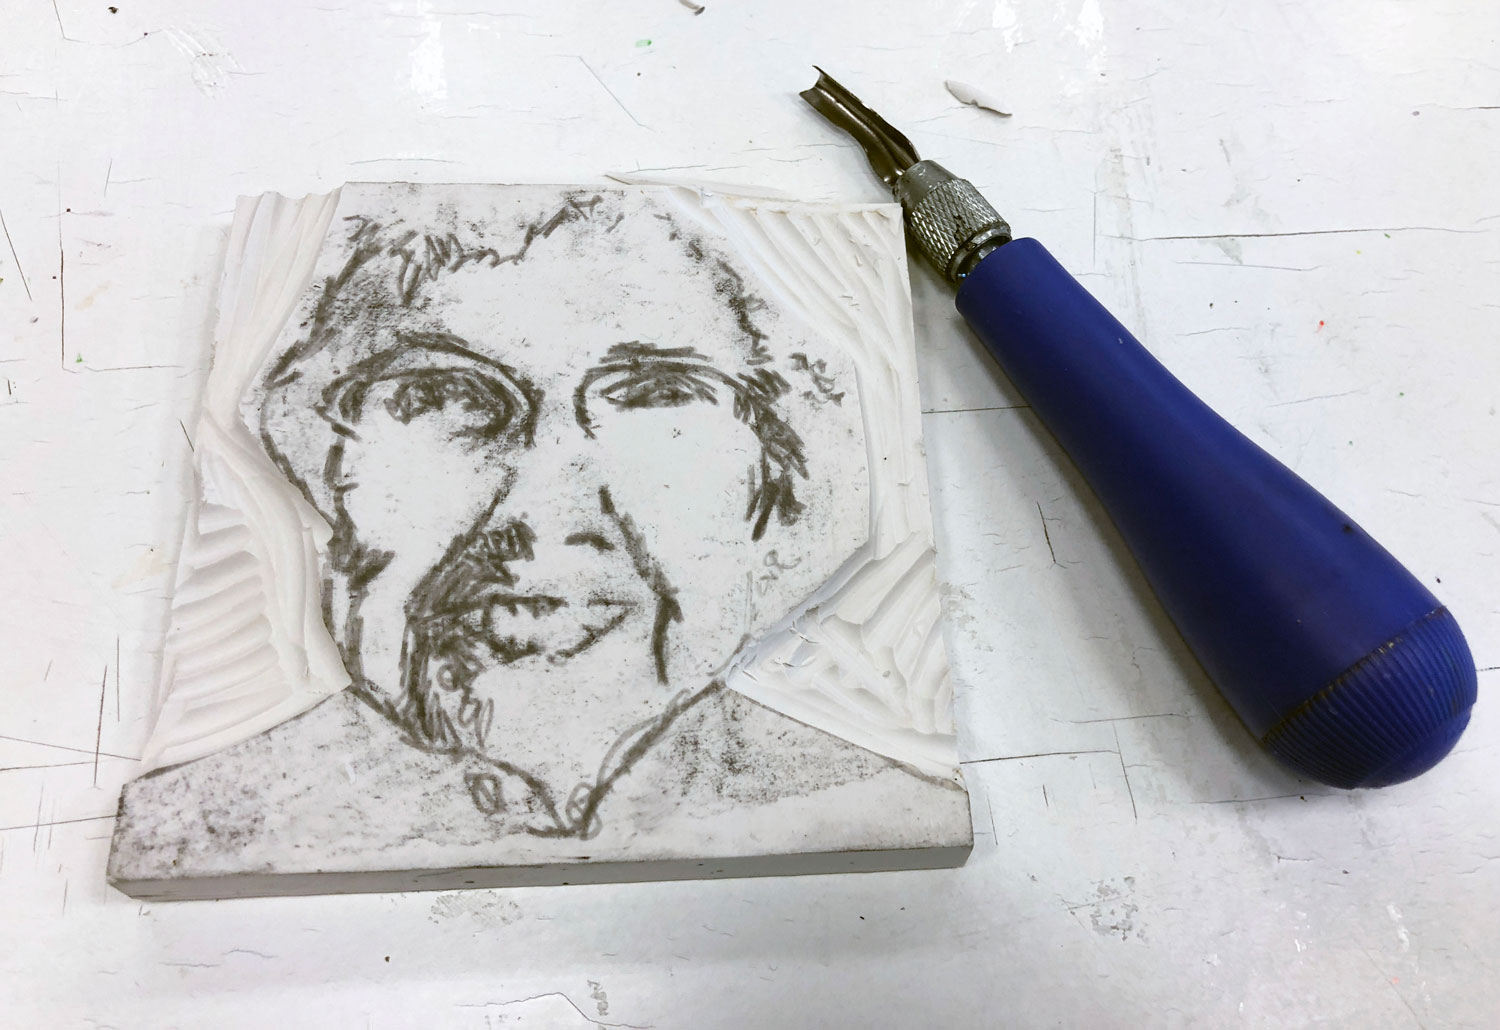 An introduction to relief printmaking that covers the basics of using linoleum to make a portrait print. This assignment is turned into a mixed media project by incorporating Prisma colored pencils to fill in the skin tone of the portrait. This is one post in an art education blog hop. Visit and check out more!